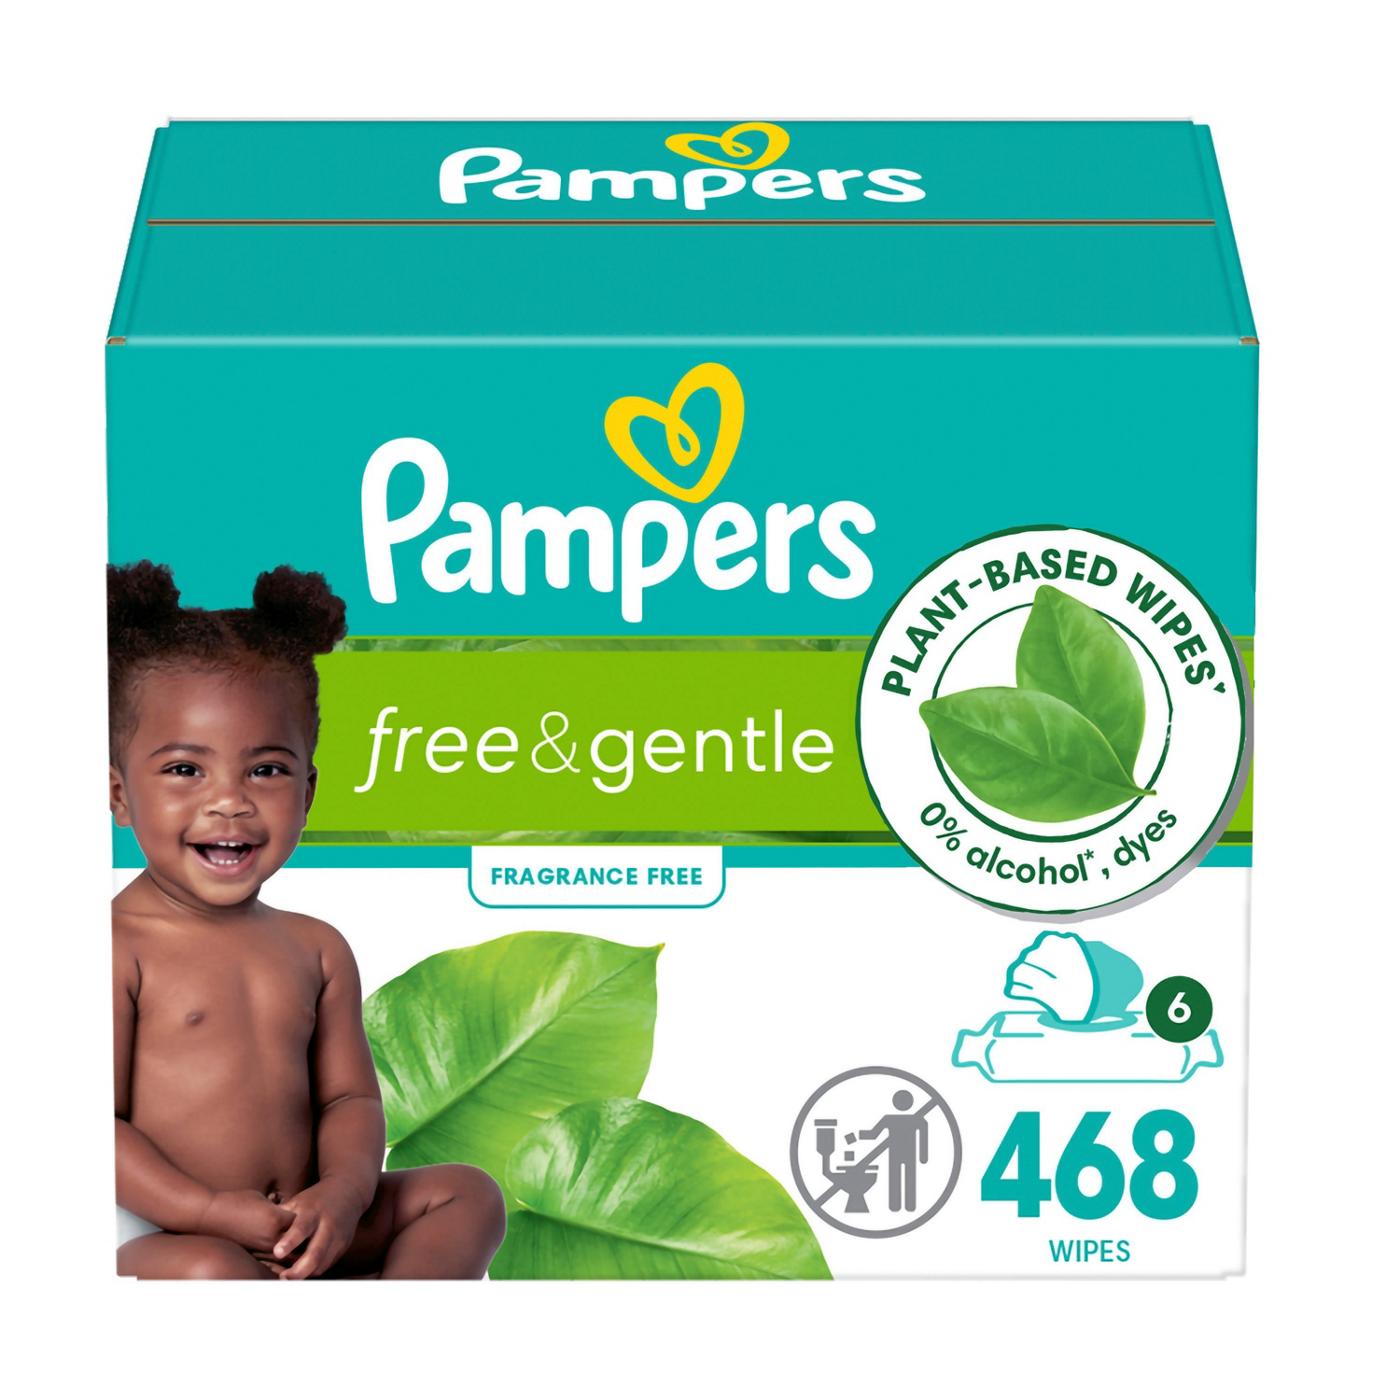 Pampers Free & Gentle Plant Based Baby Wipes 6 pk; image 1 of 10